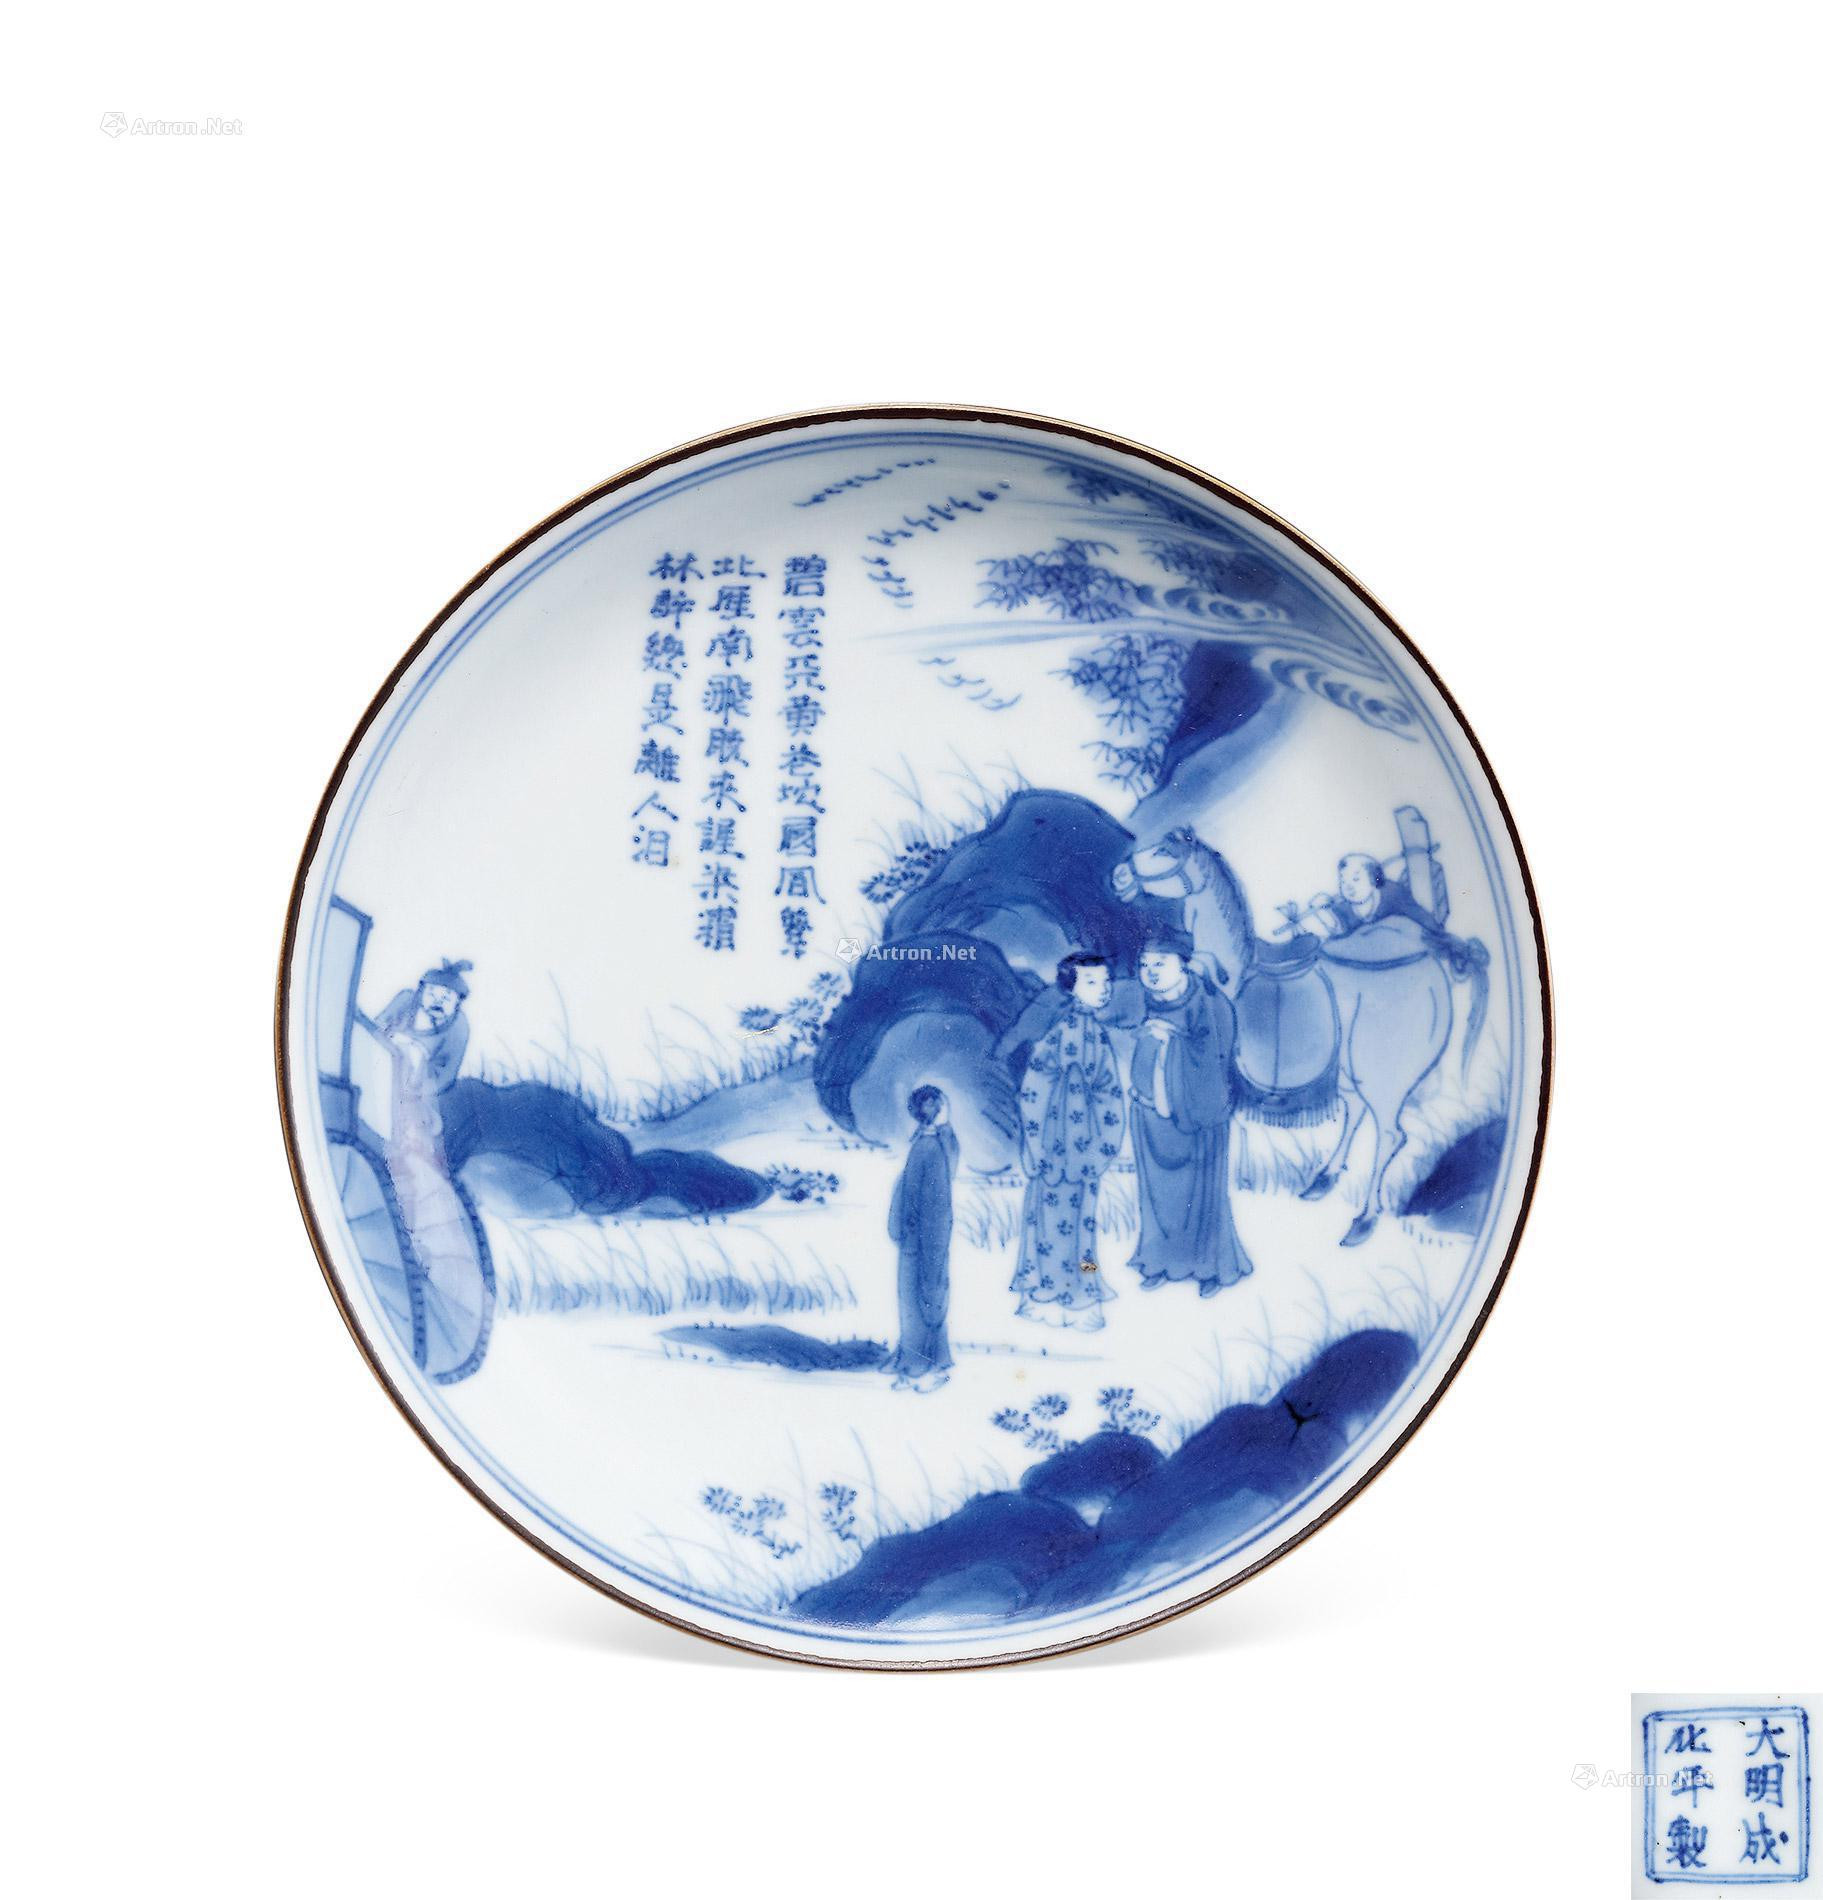 A BLUE AND WHITE FIGURES PLATE WITH POETIC PROSE DESIGN